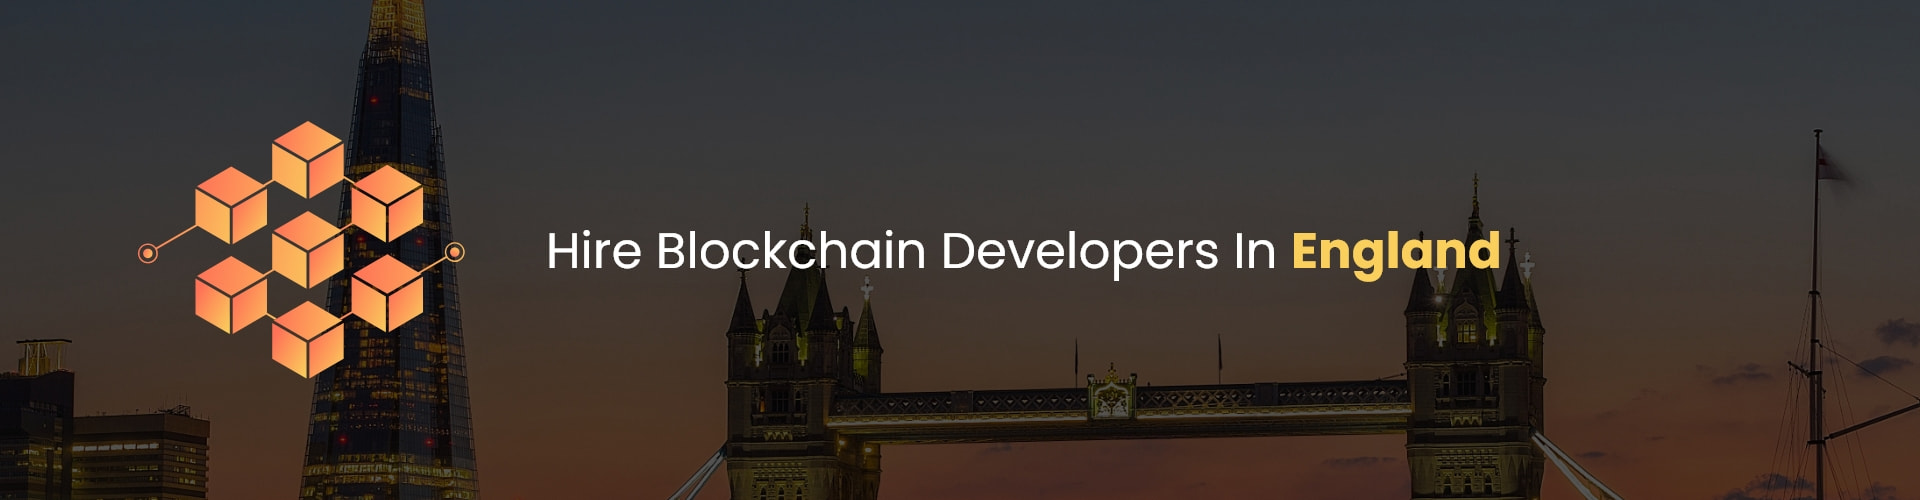 hire blockchain developers in england